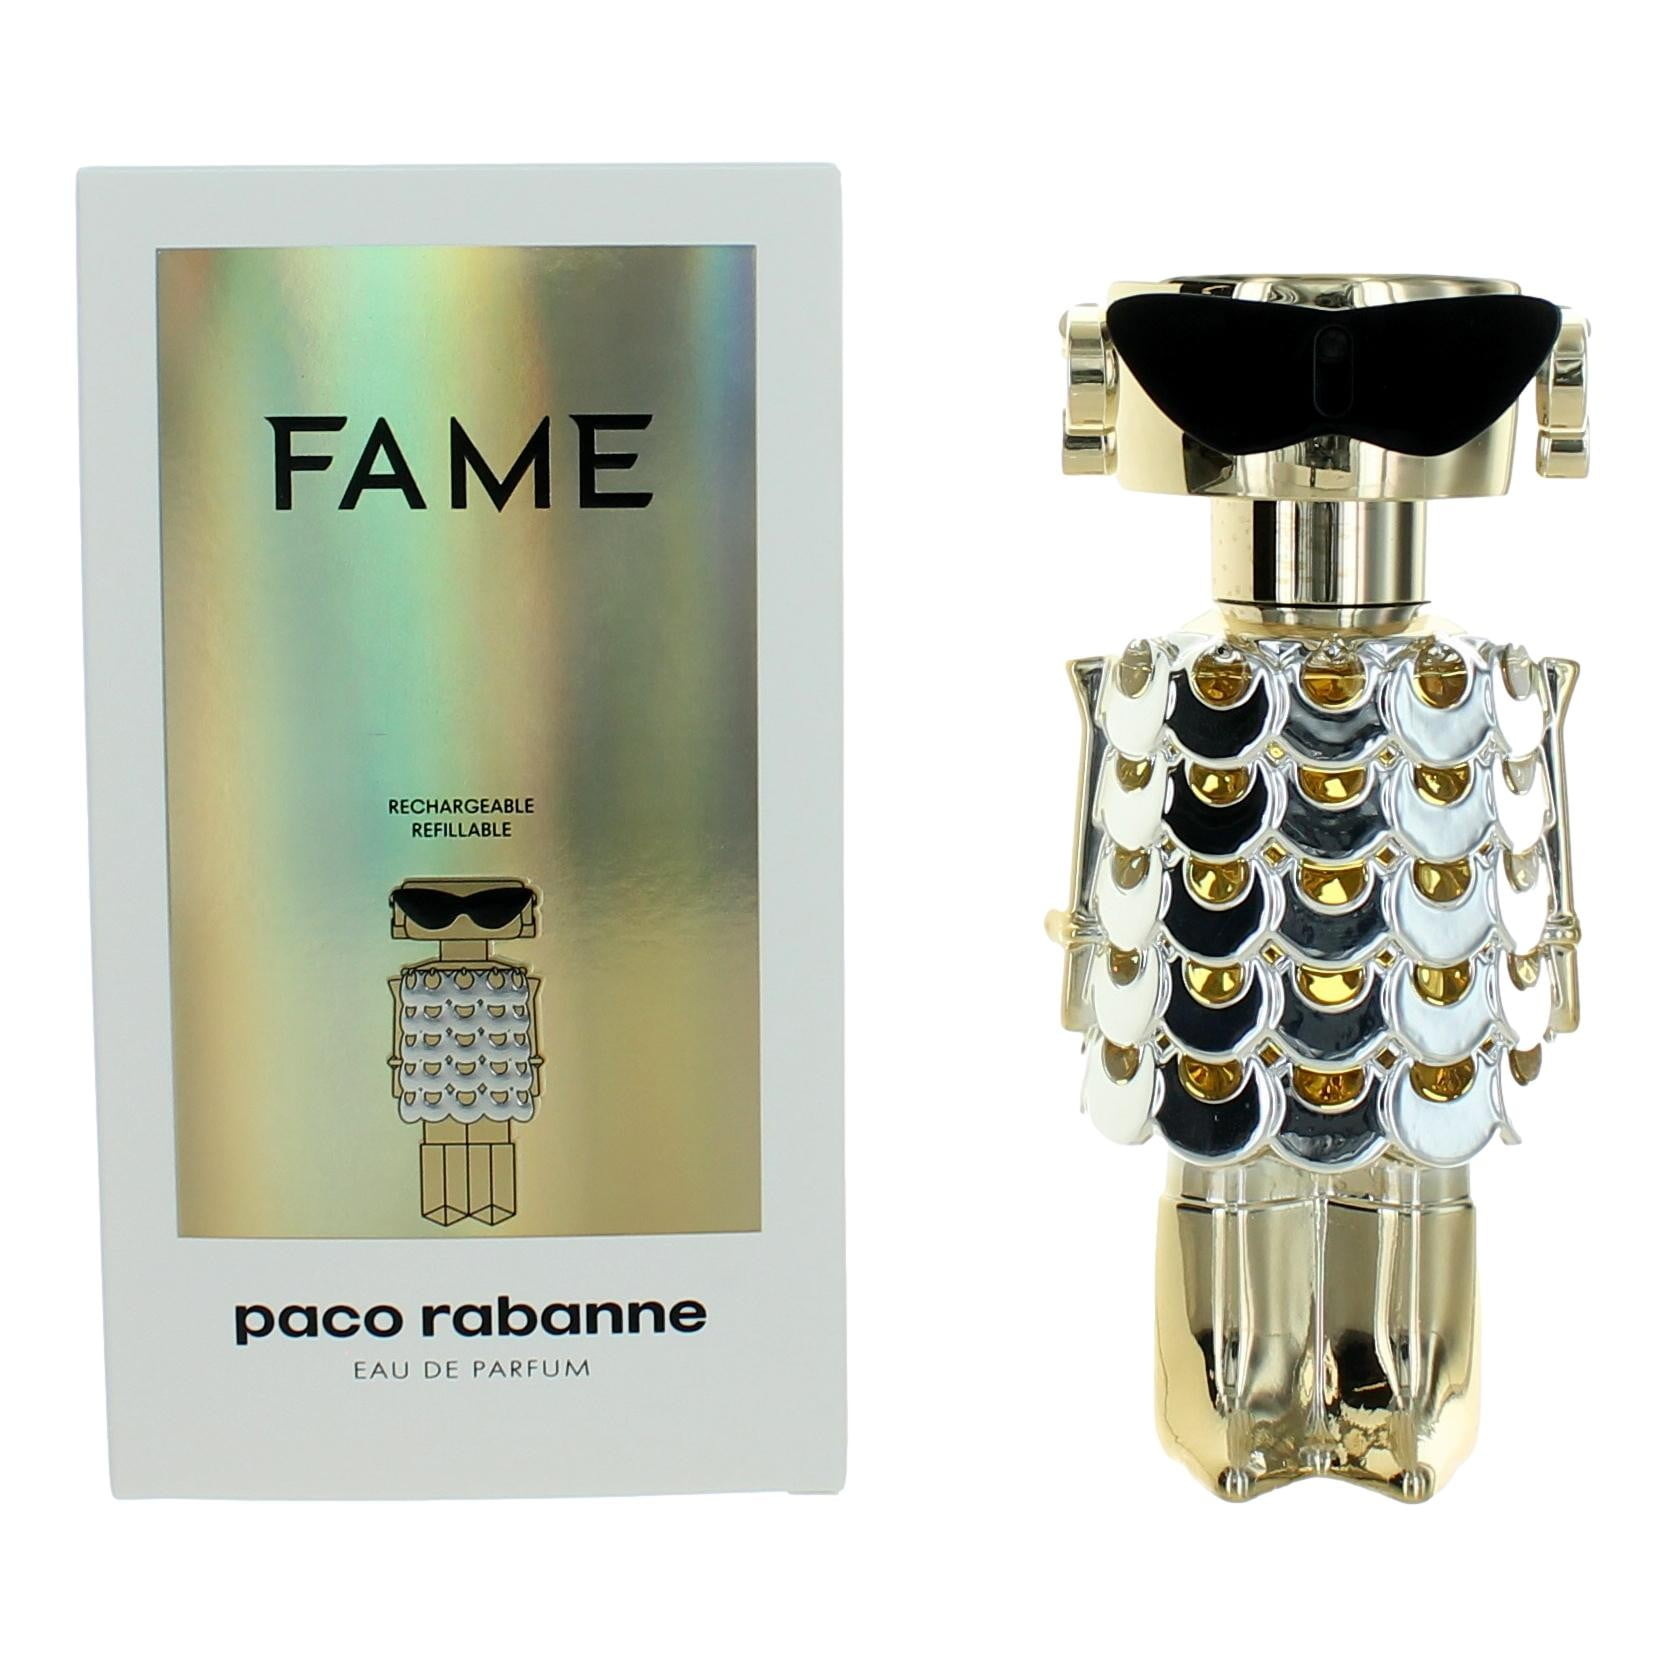 Fame by Paco Rabanne for Women - 2.7 oz EDP Spray (Refillable) | Duft-Sets